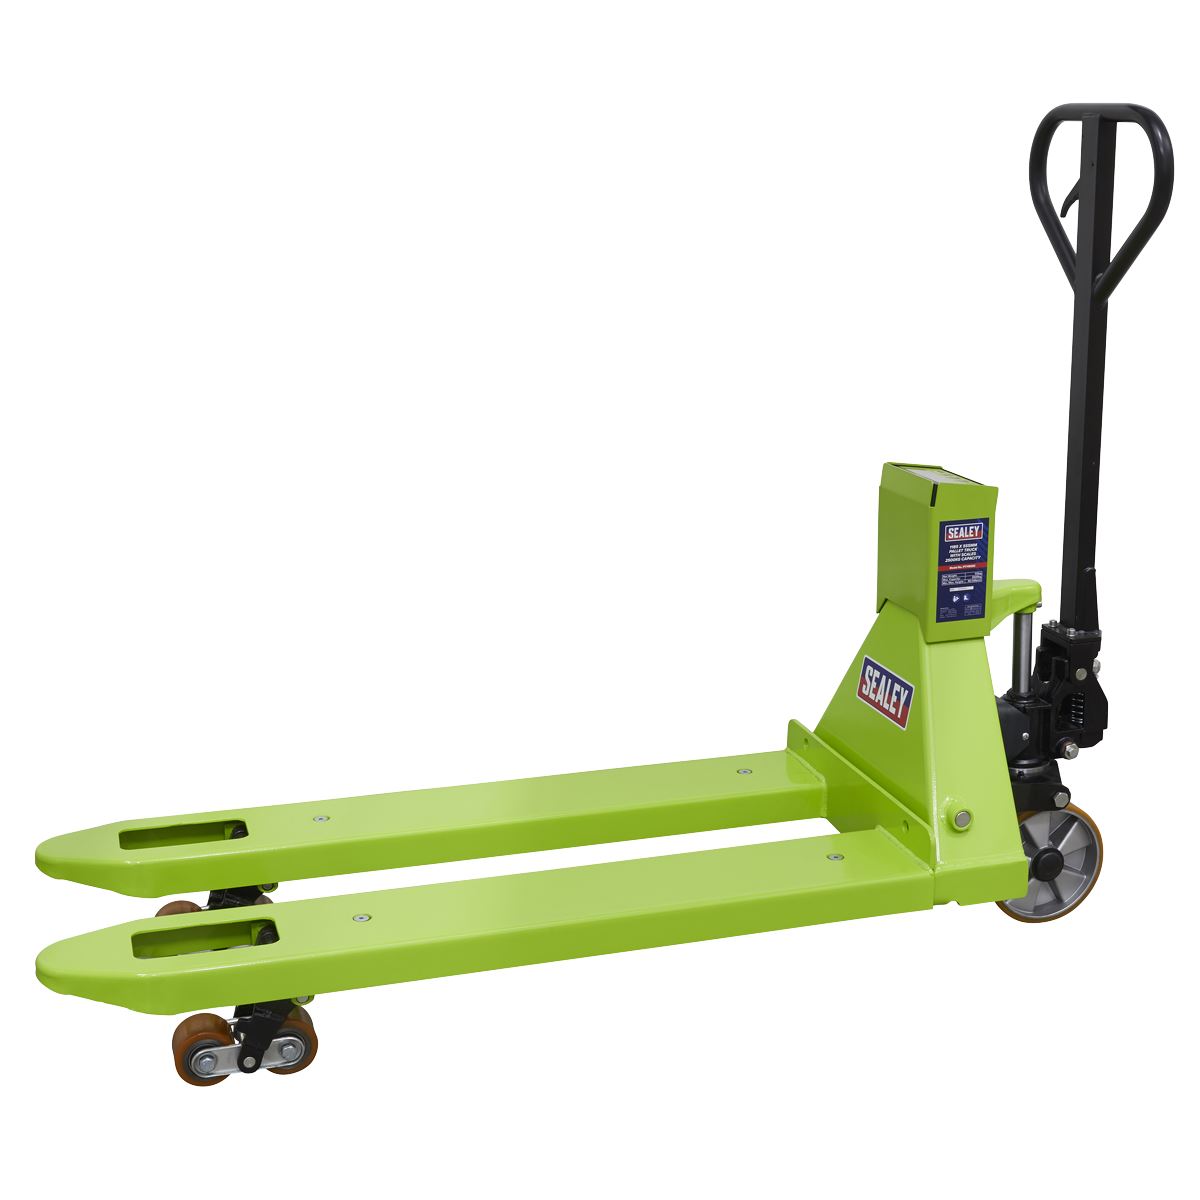 Sealey Pallet Truck with Scales - 2000kg Capacity 1150 x 555mm